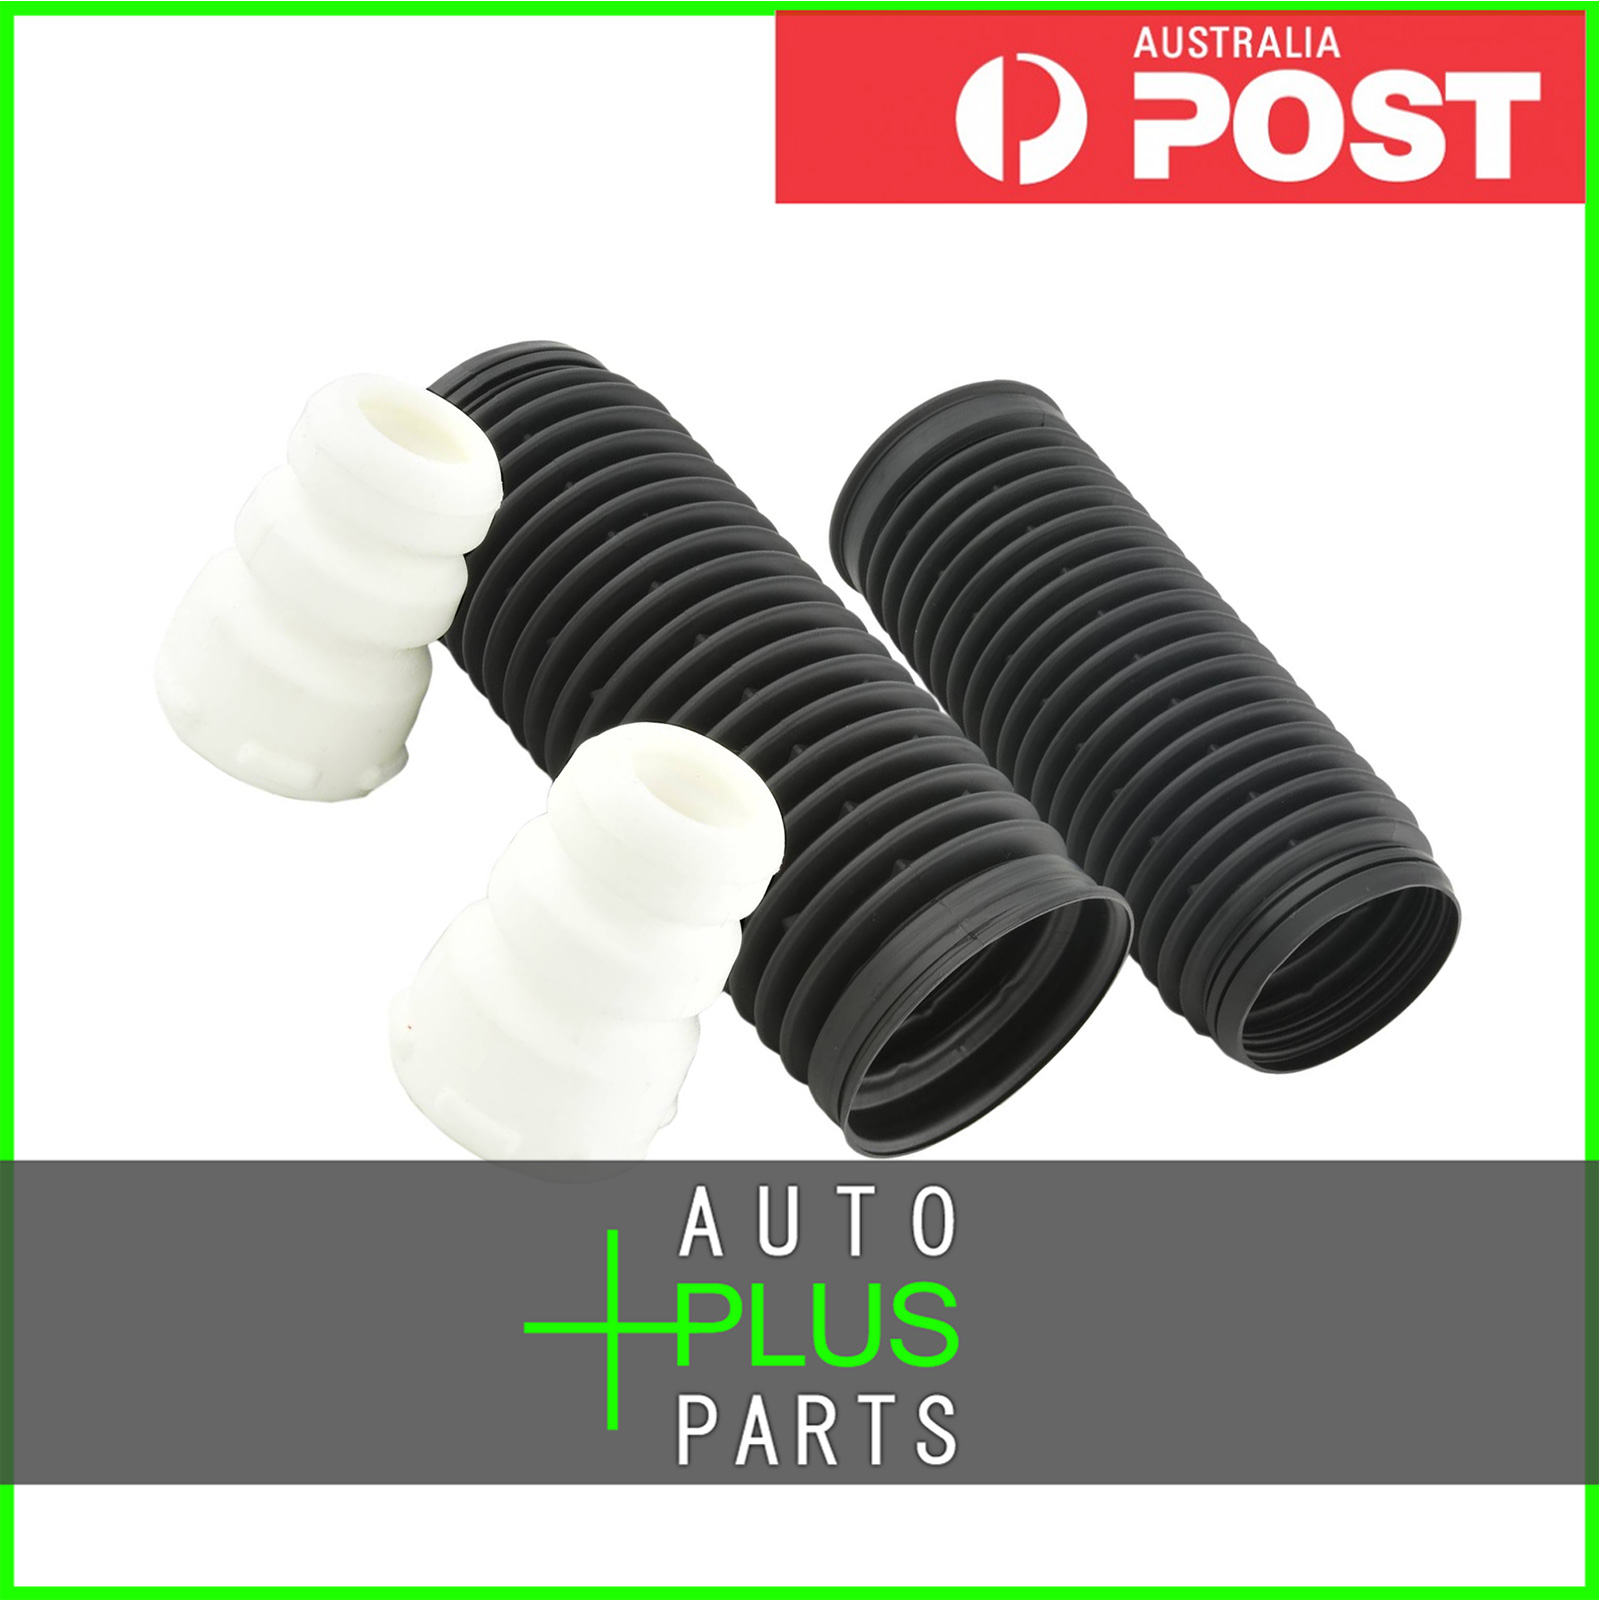 Fits VW BORA BOOT WITH JOUNCE BUMPER FRONT SHOCK ABSORBER KIT - BORA Product Photo